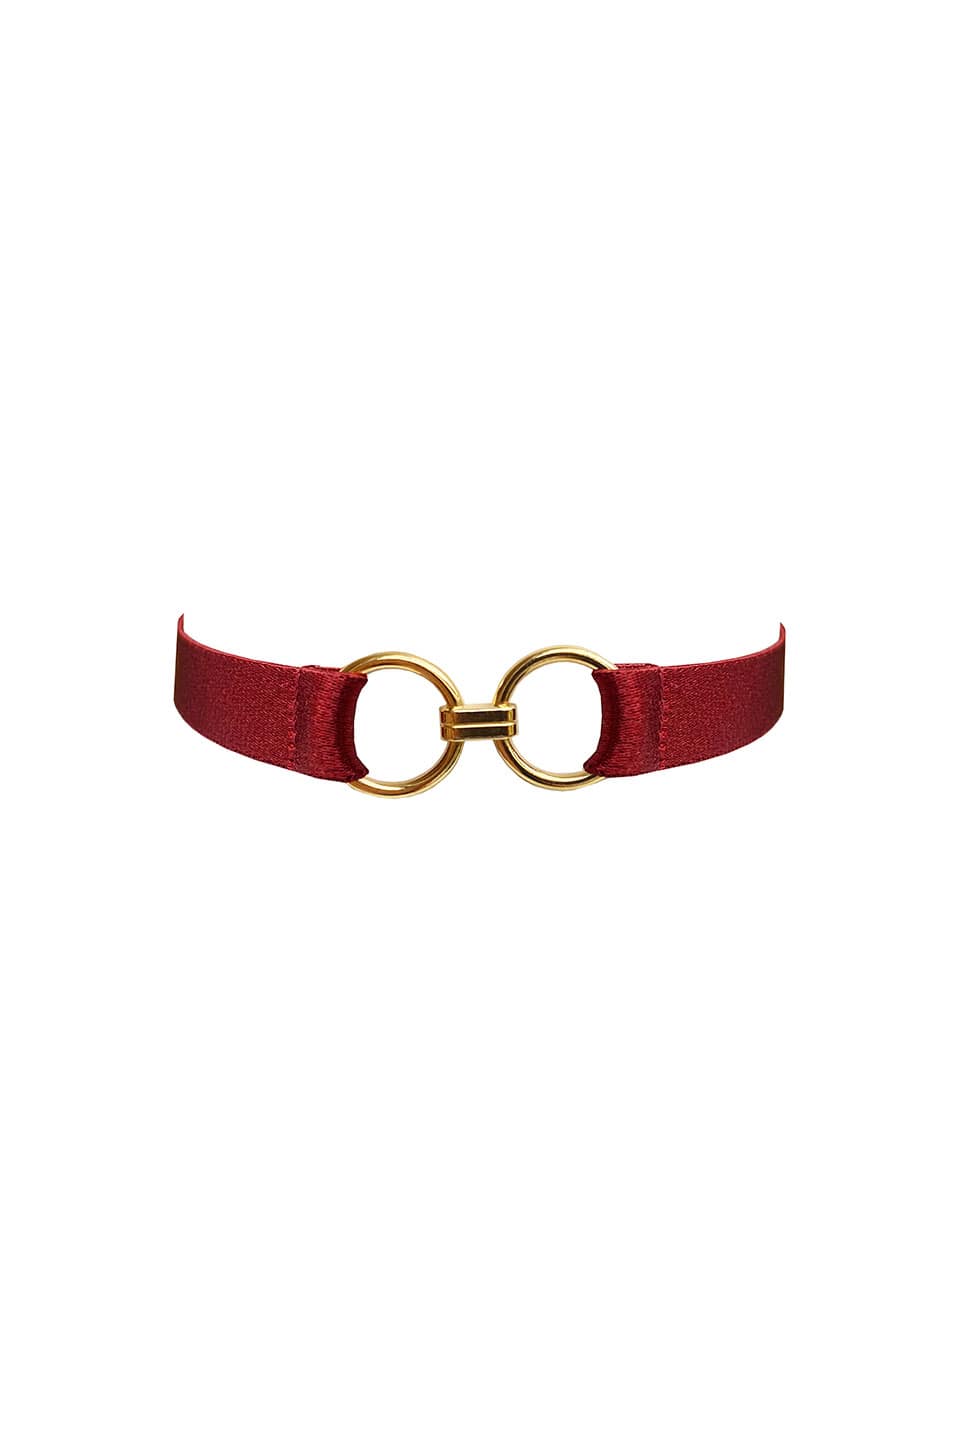 Thumbnail for Product gallery 1, Atelier Bordelle Kleio Strap Collar Burnt Red Front